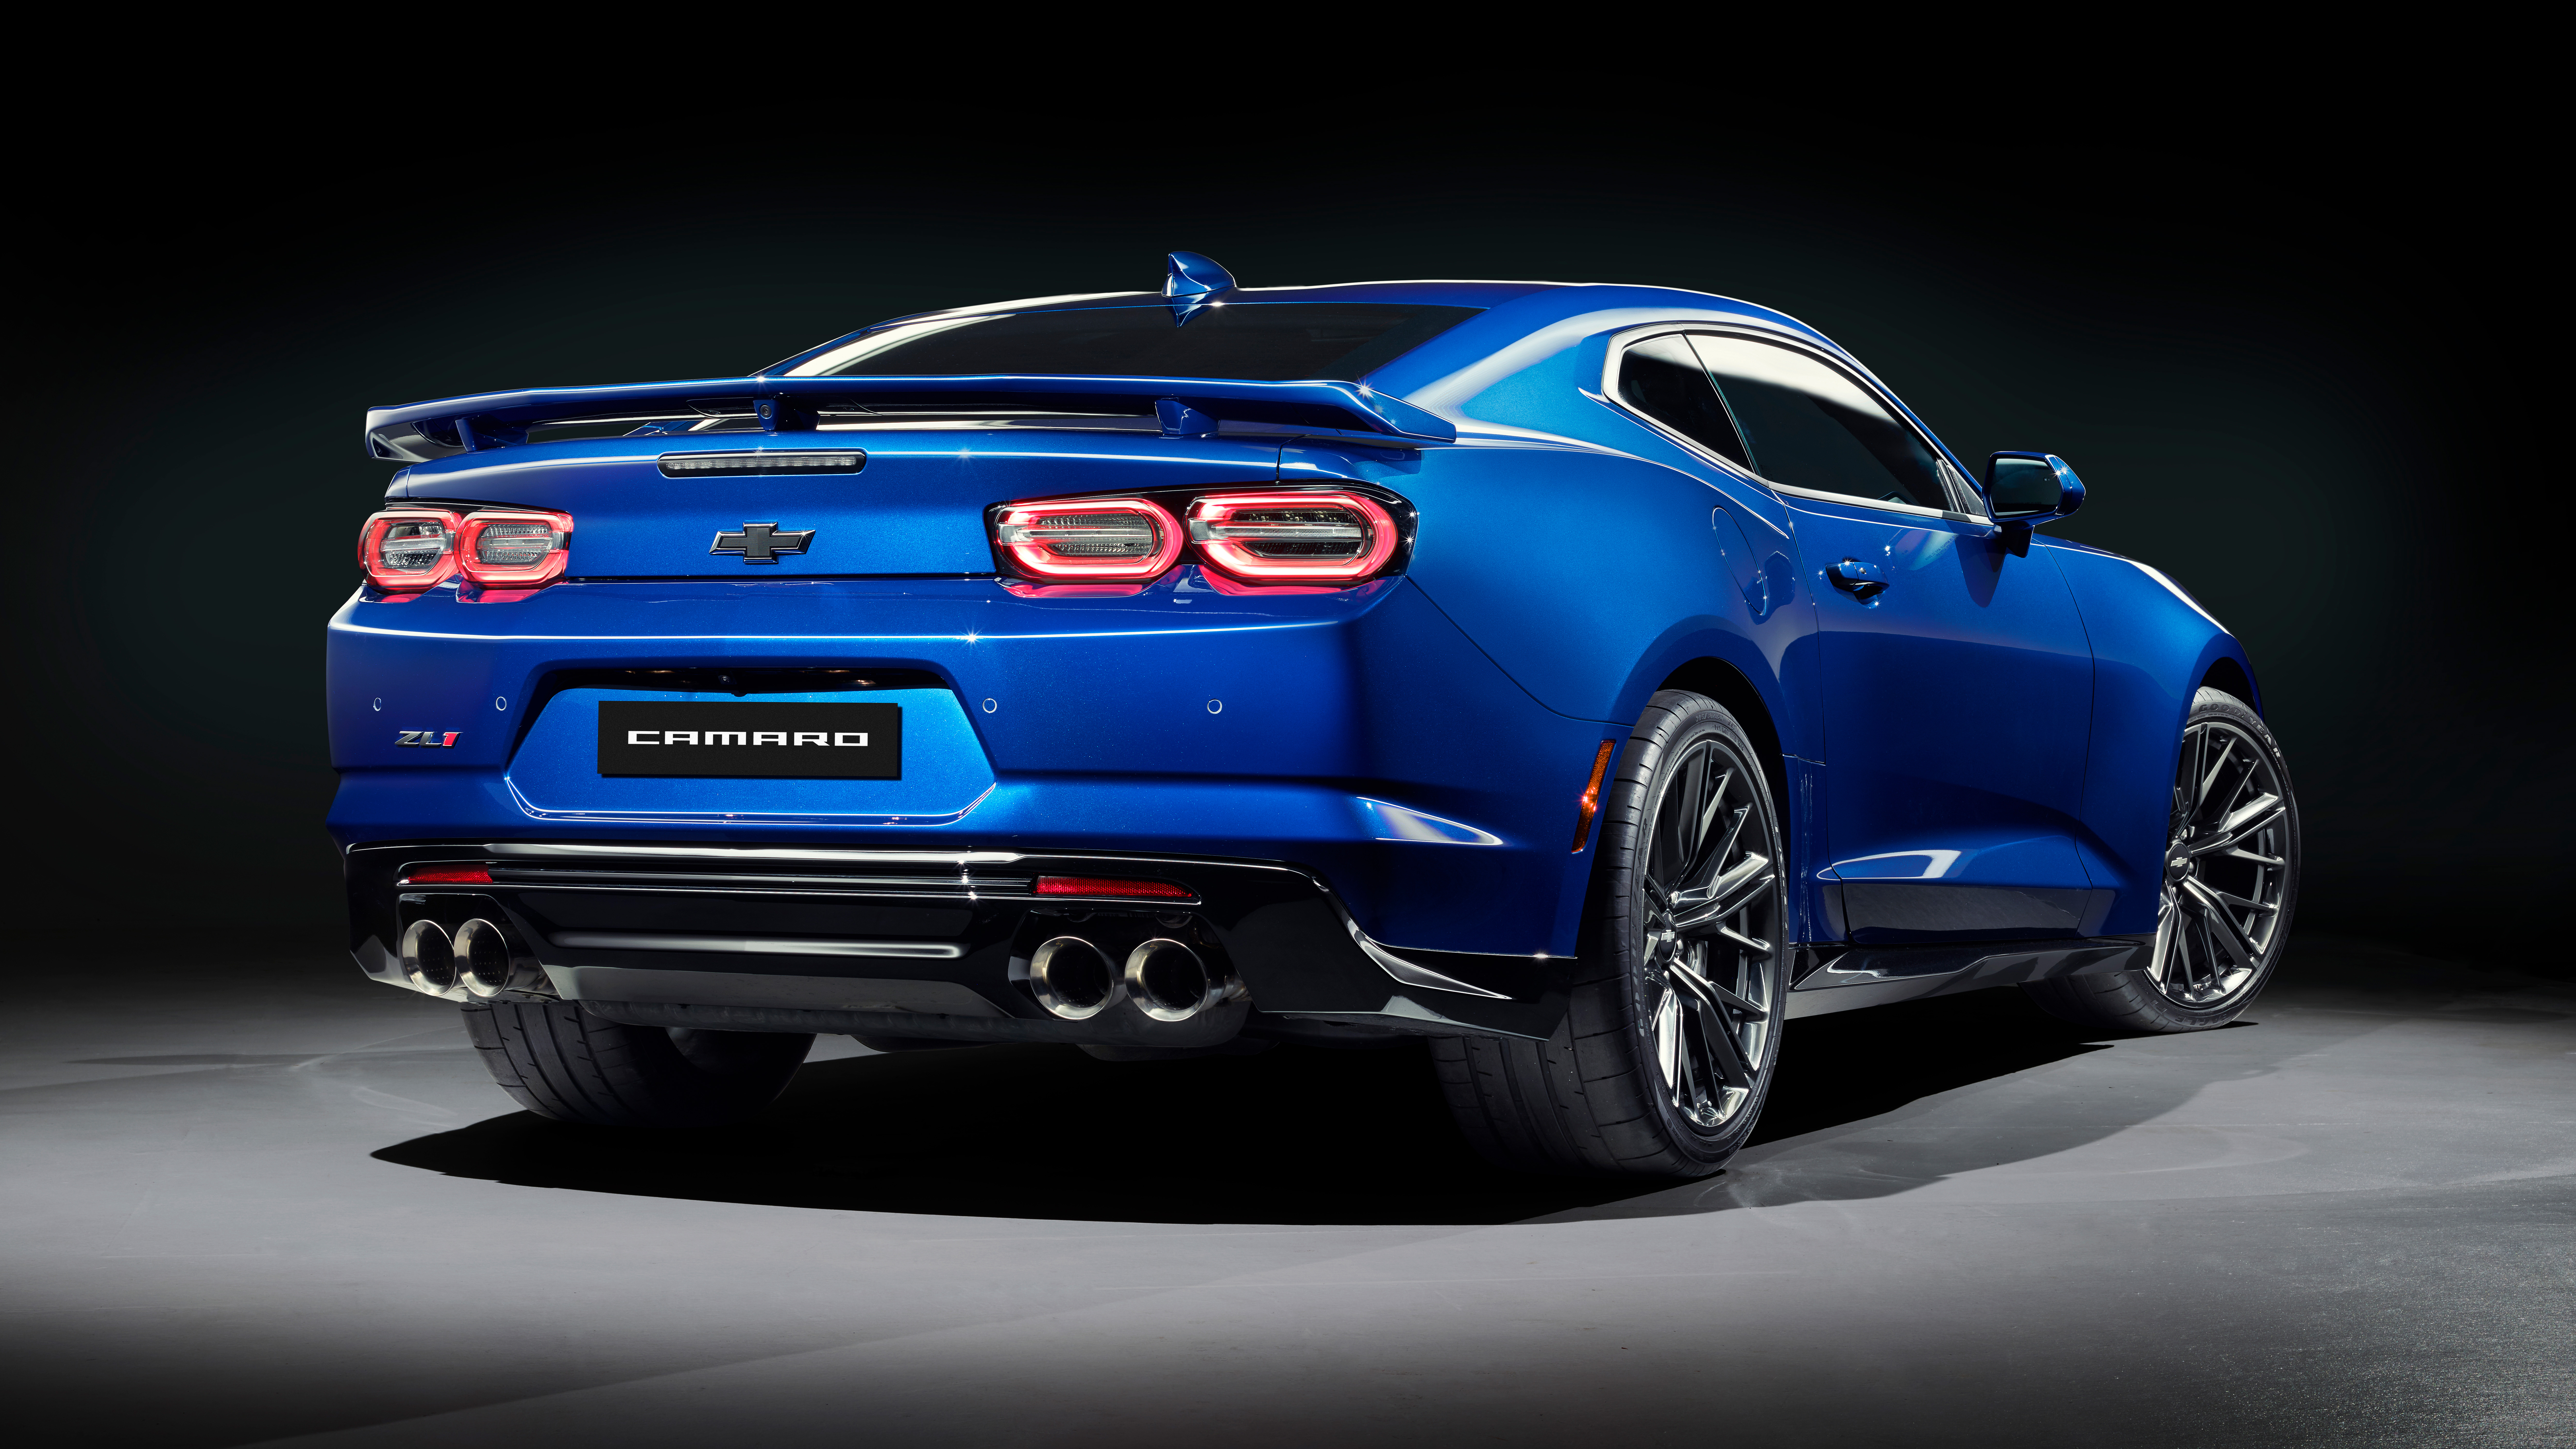 Chevrolet Camaro Zl1 2019 Rear Hd Cars 4k Wallpapers Images